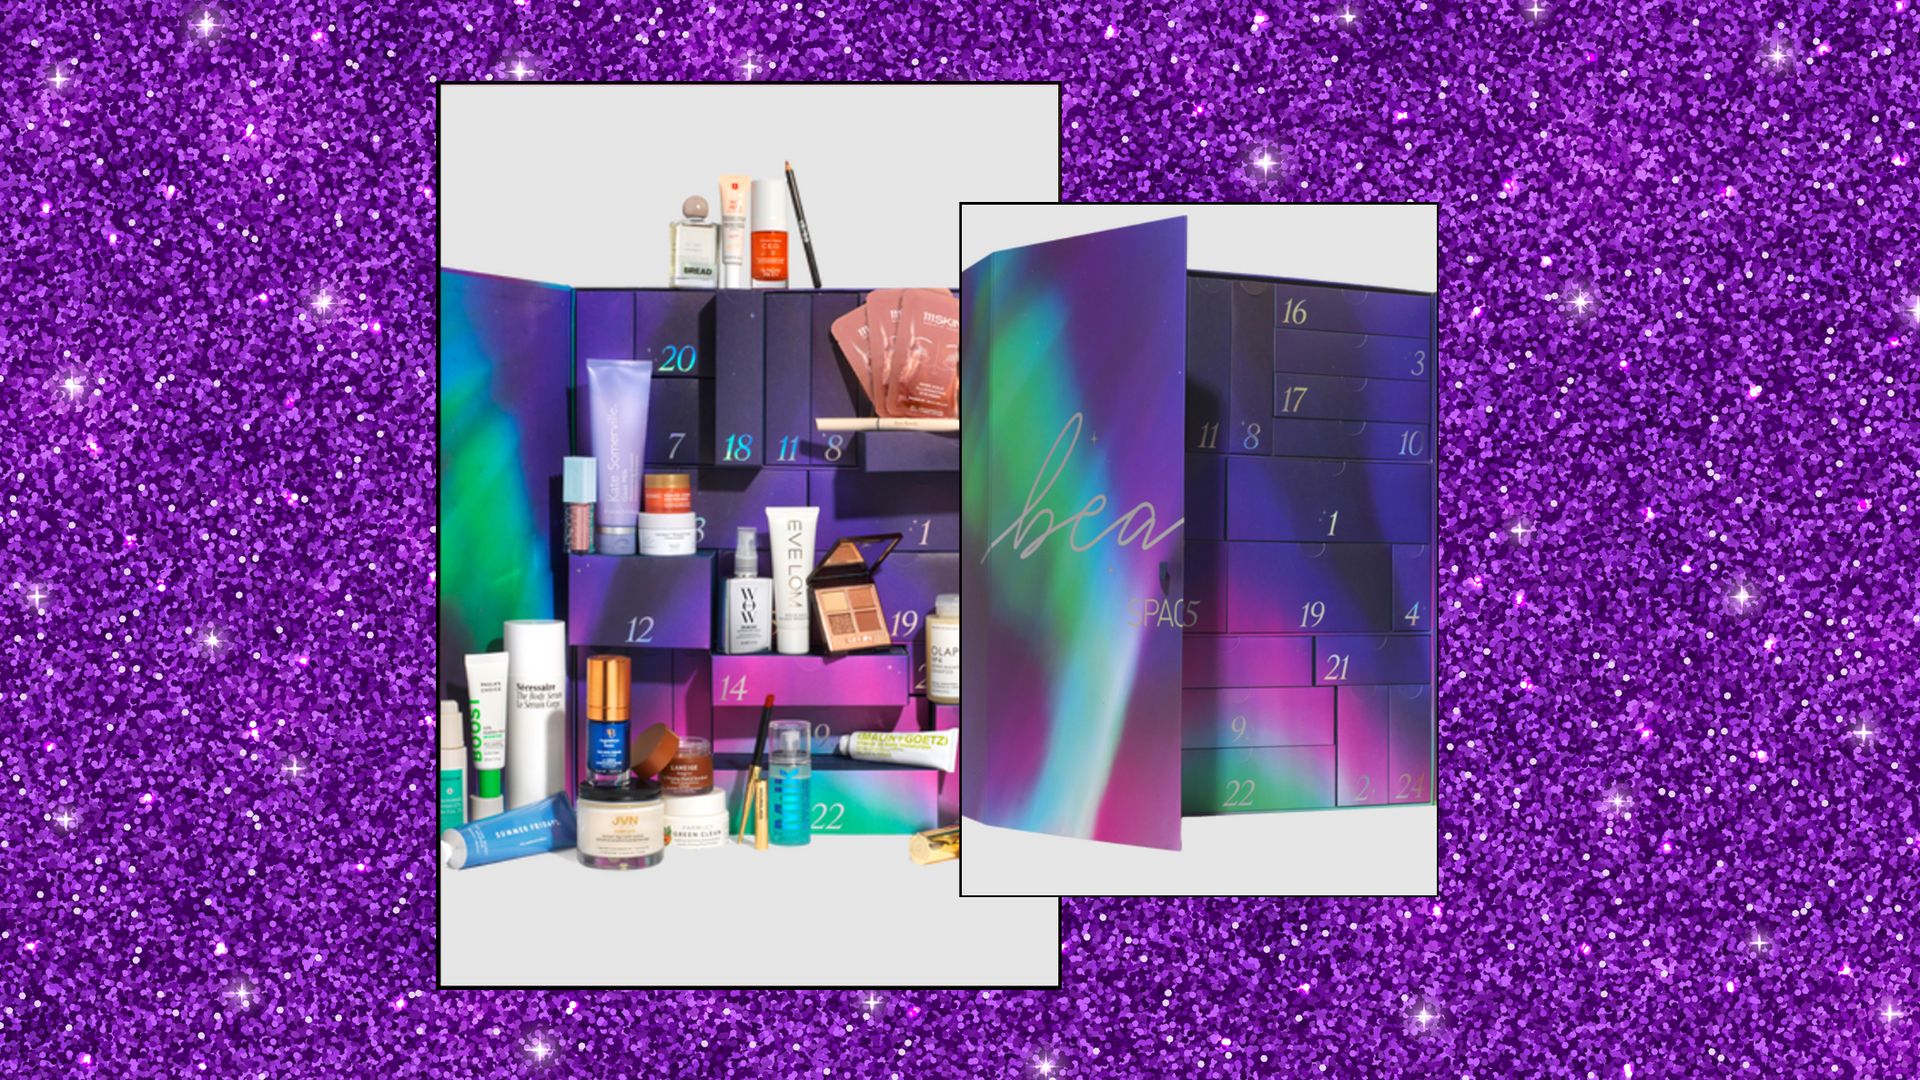 The Space NK advent calendar has won over so many influencers - but is it worth the price tag?